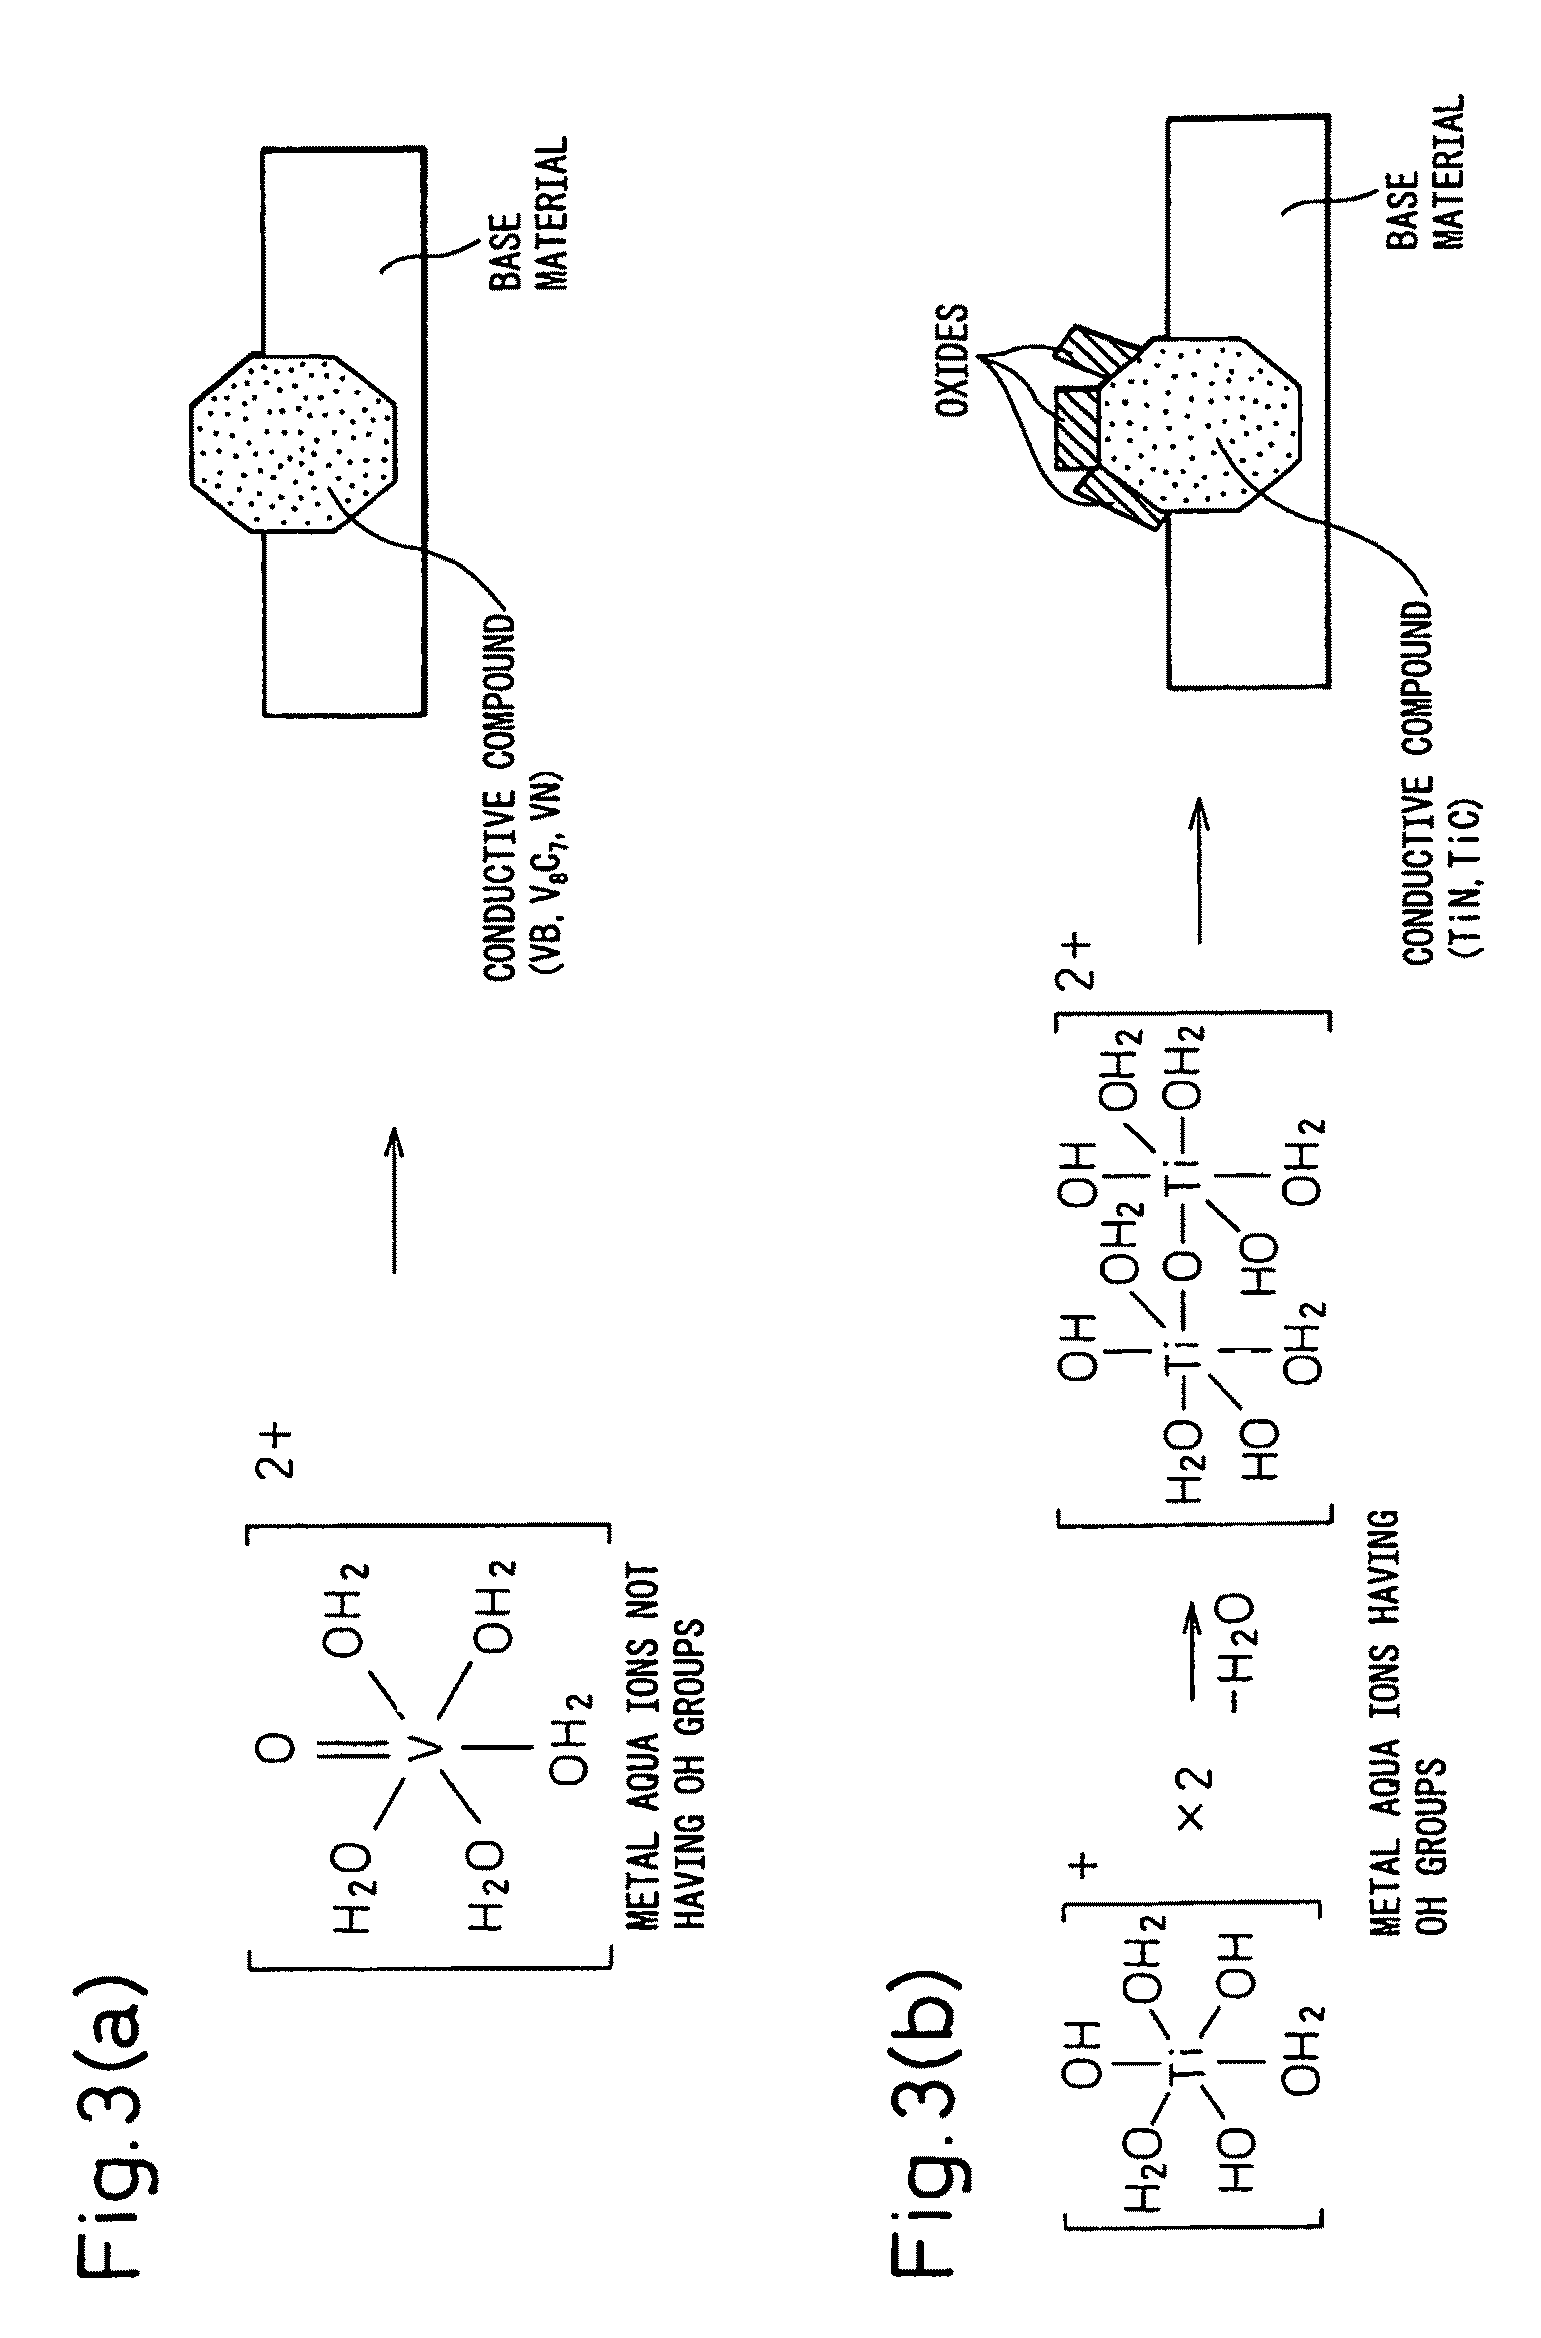 Stainless steel, titanium, or titanium alloy solid polymer fuel cell separator and its method of production and method of evaluation of warp and twist of separator